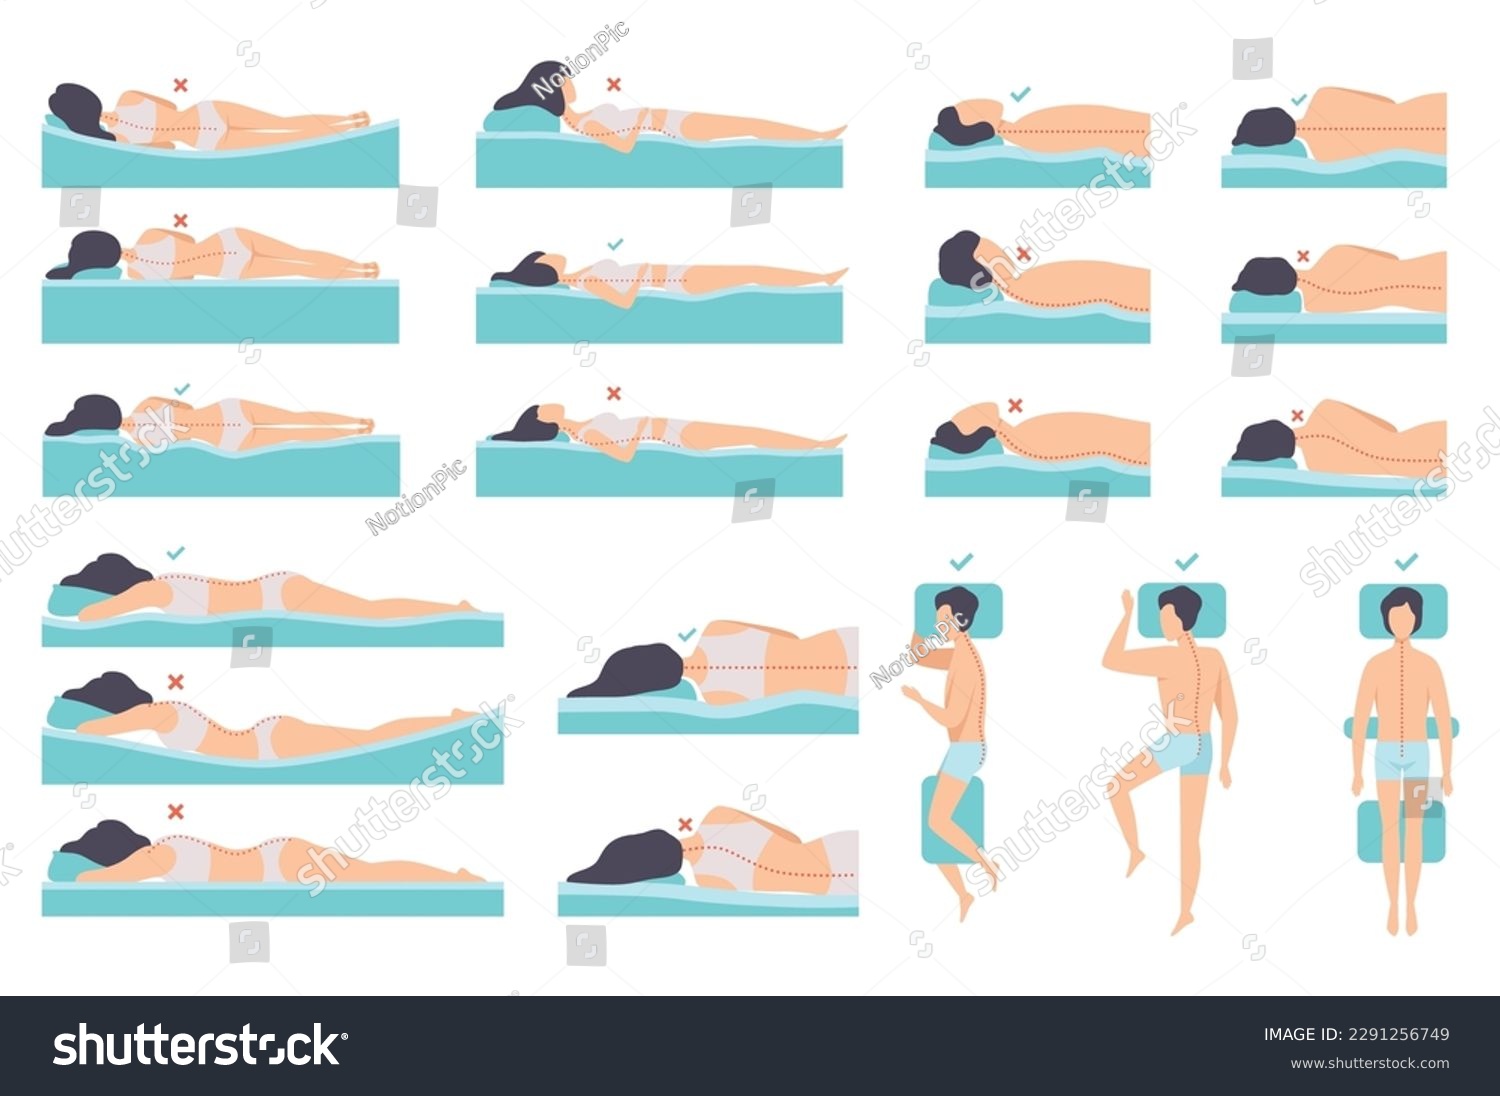 SVG of Correct and incorrect posture of spine during sleep set. Men and women sleeping in different poses cartoon vector svg